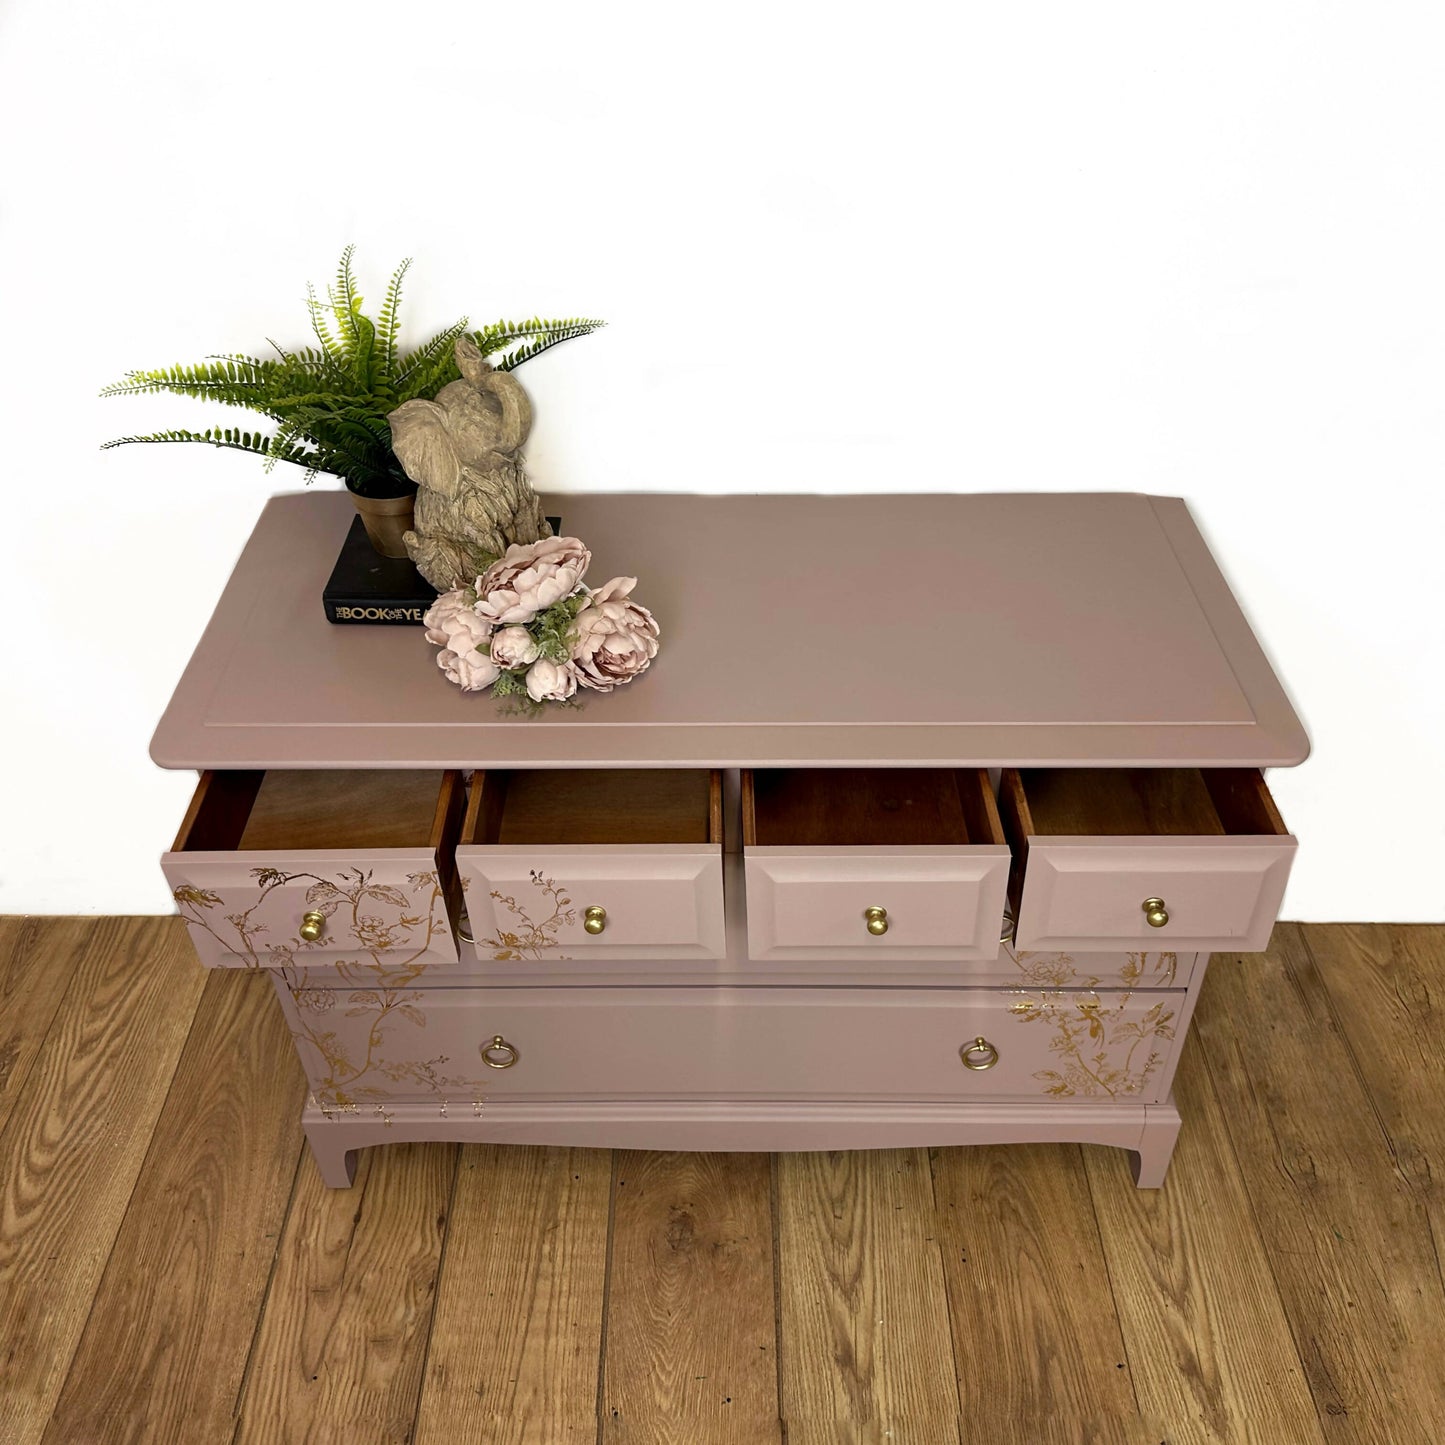 Pretty dusky pink Stag Minstrel Chest of Drawers with gold bird song design, vintage, dresser, blossom, mcm, sideboard